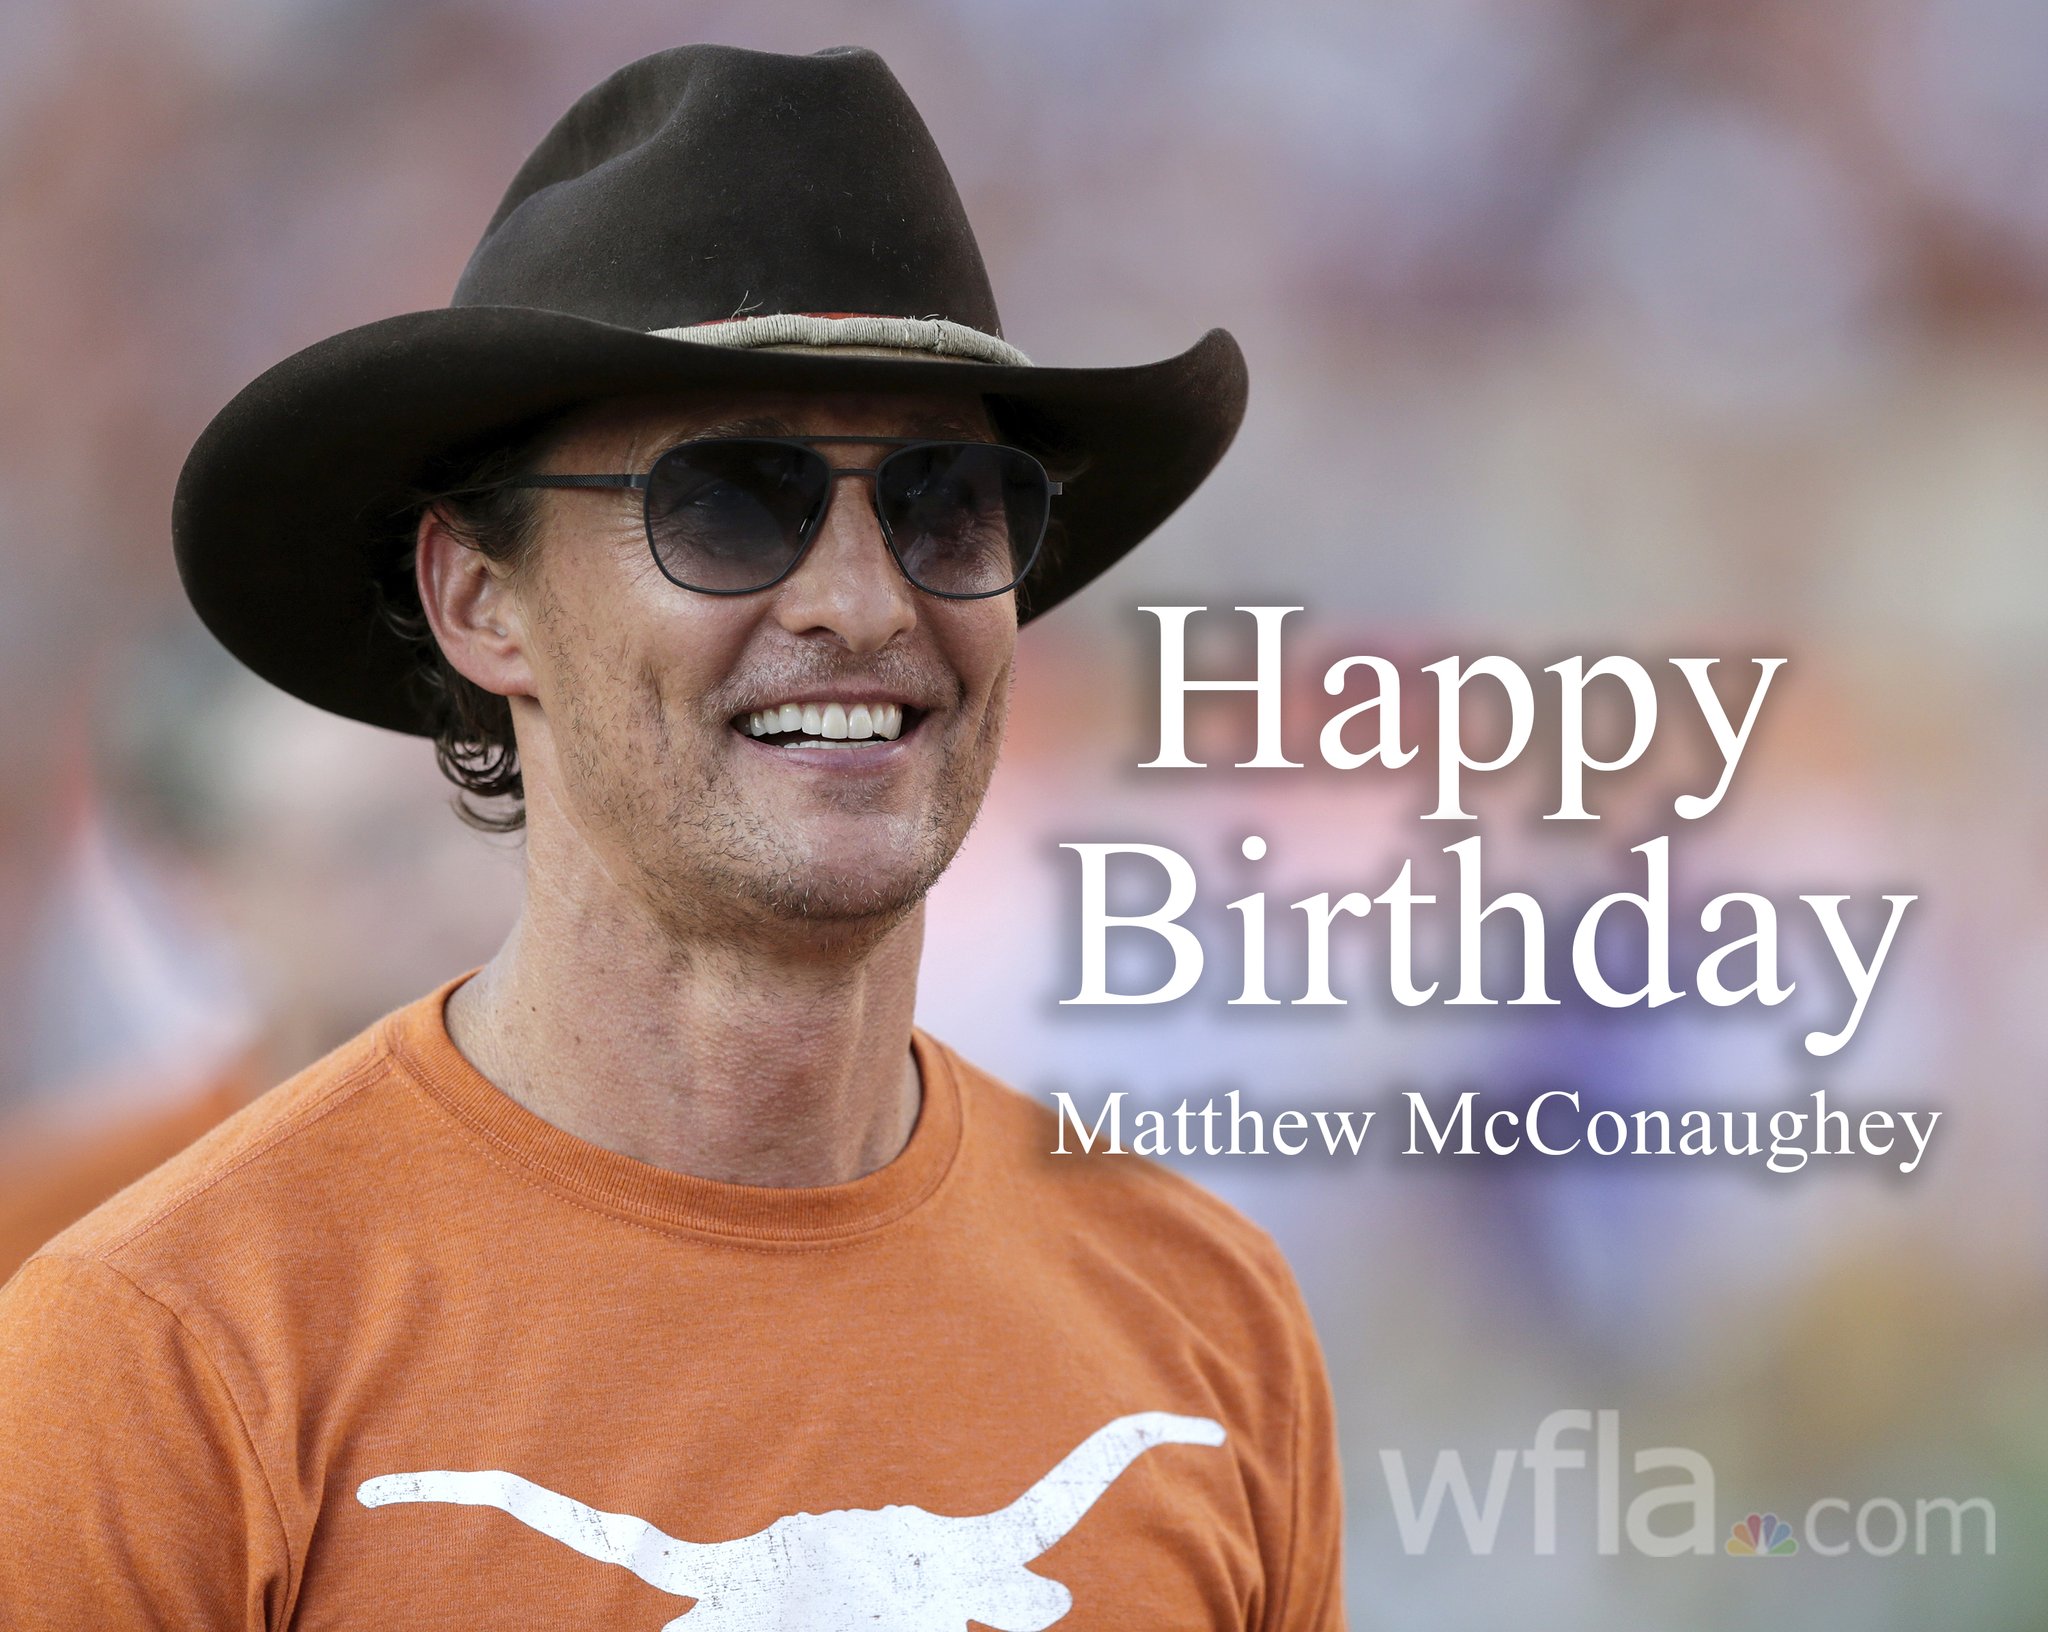 Join us in wishing a happy 52nd birthday to actor Matthew McConaughey!  